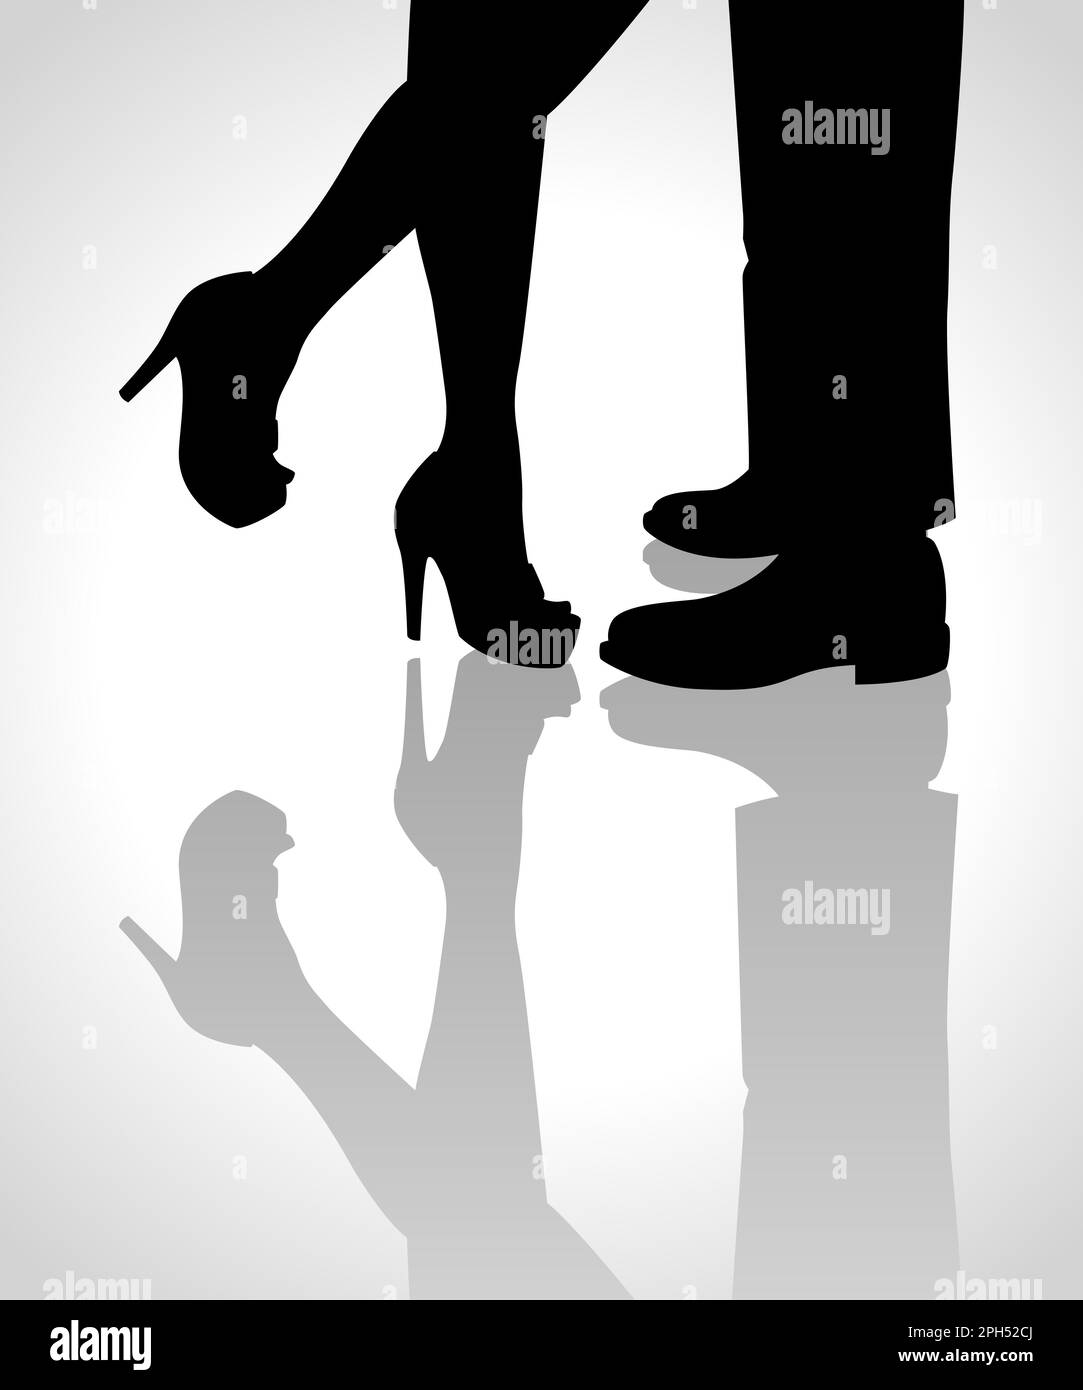 Silhouette illustration of a cuddling or kissing couple legs Stock Photo